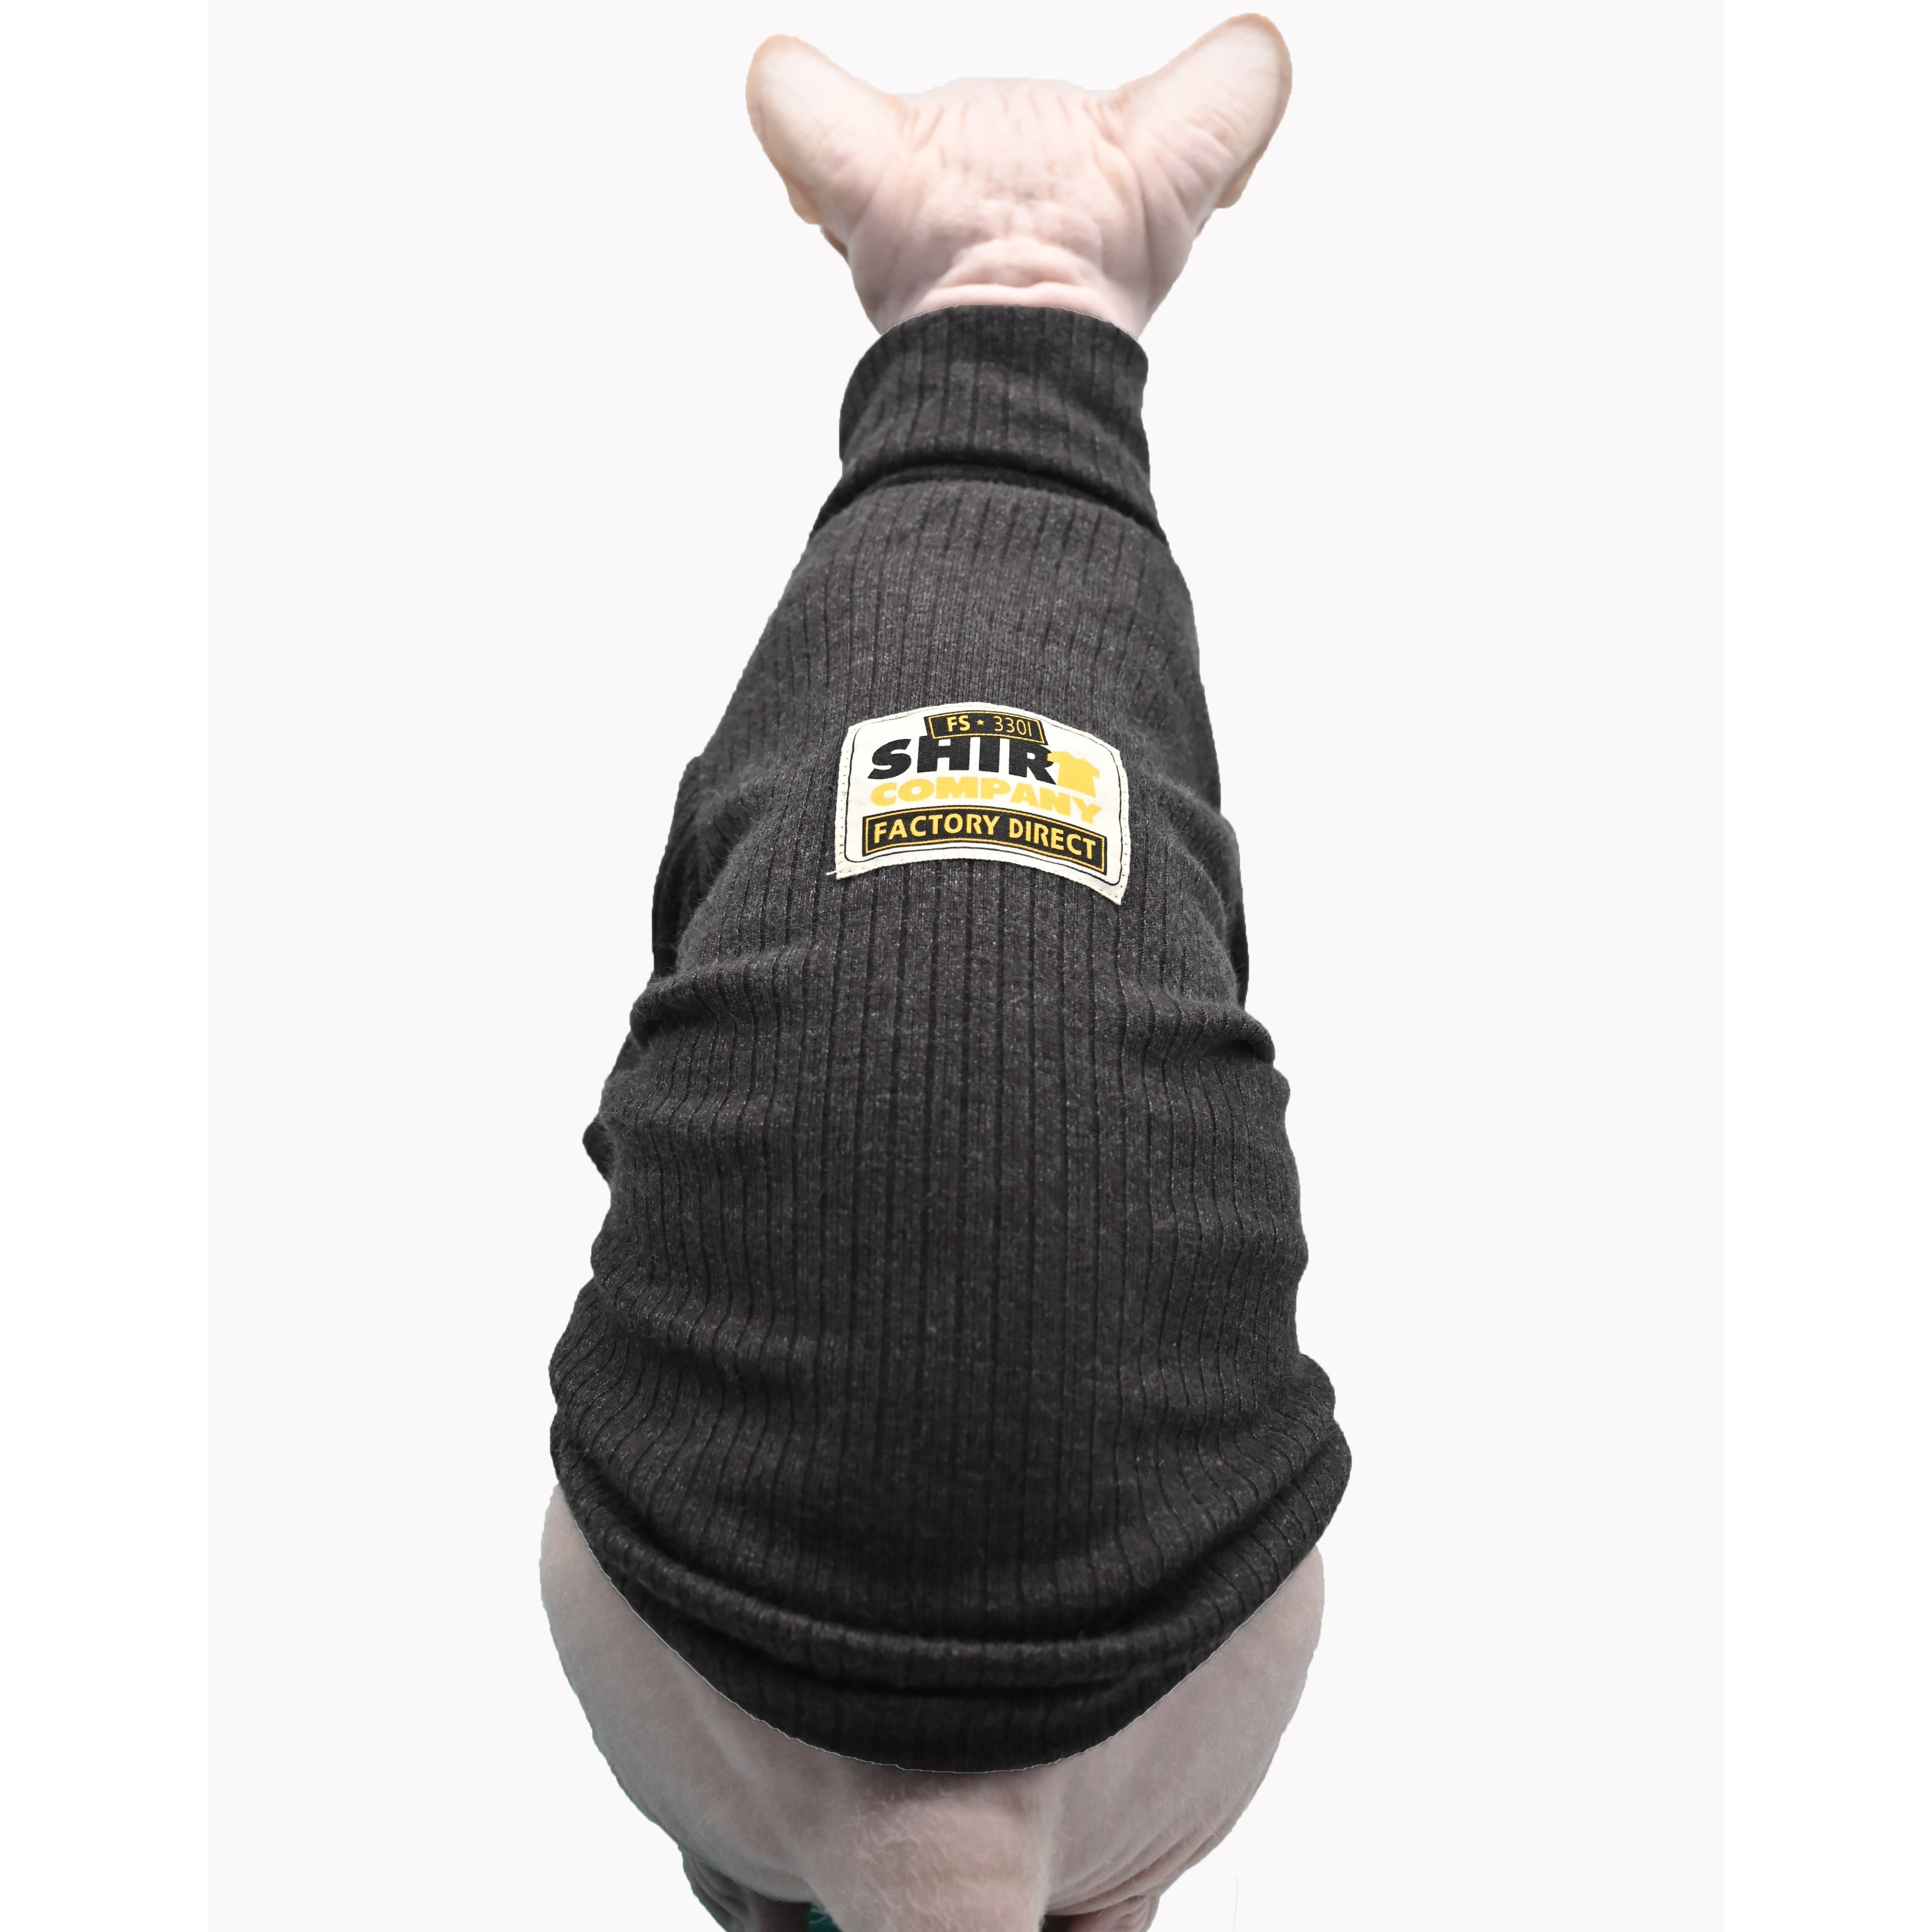 Winter Sphynx Cat Clothes - Deep Grey / XS - Clothes for